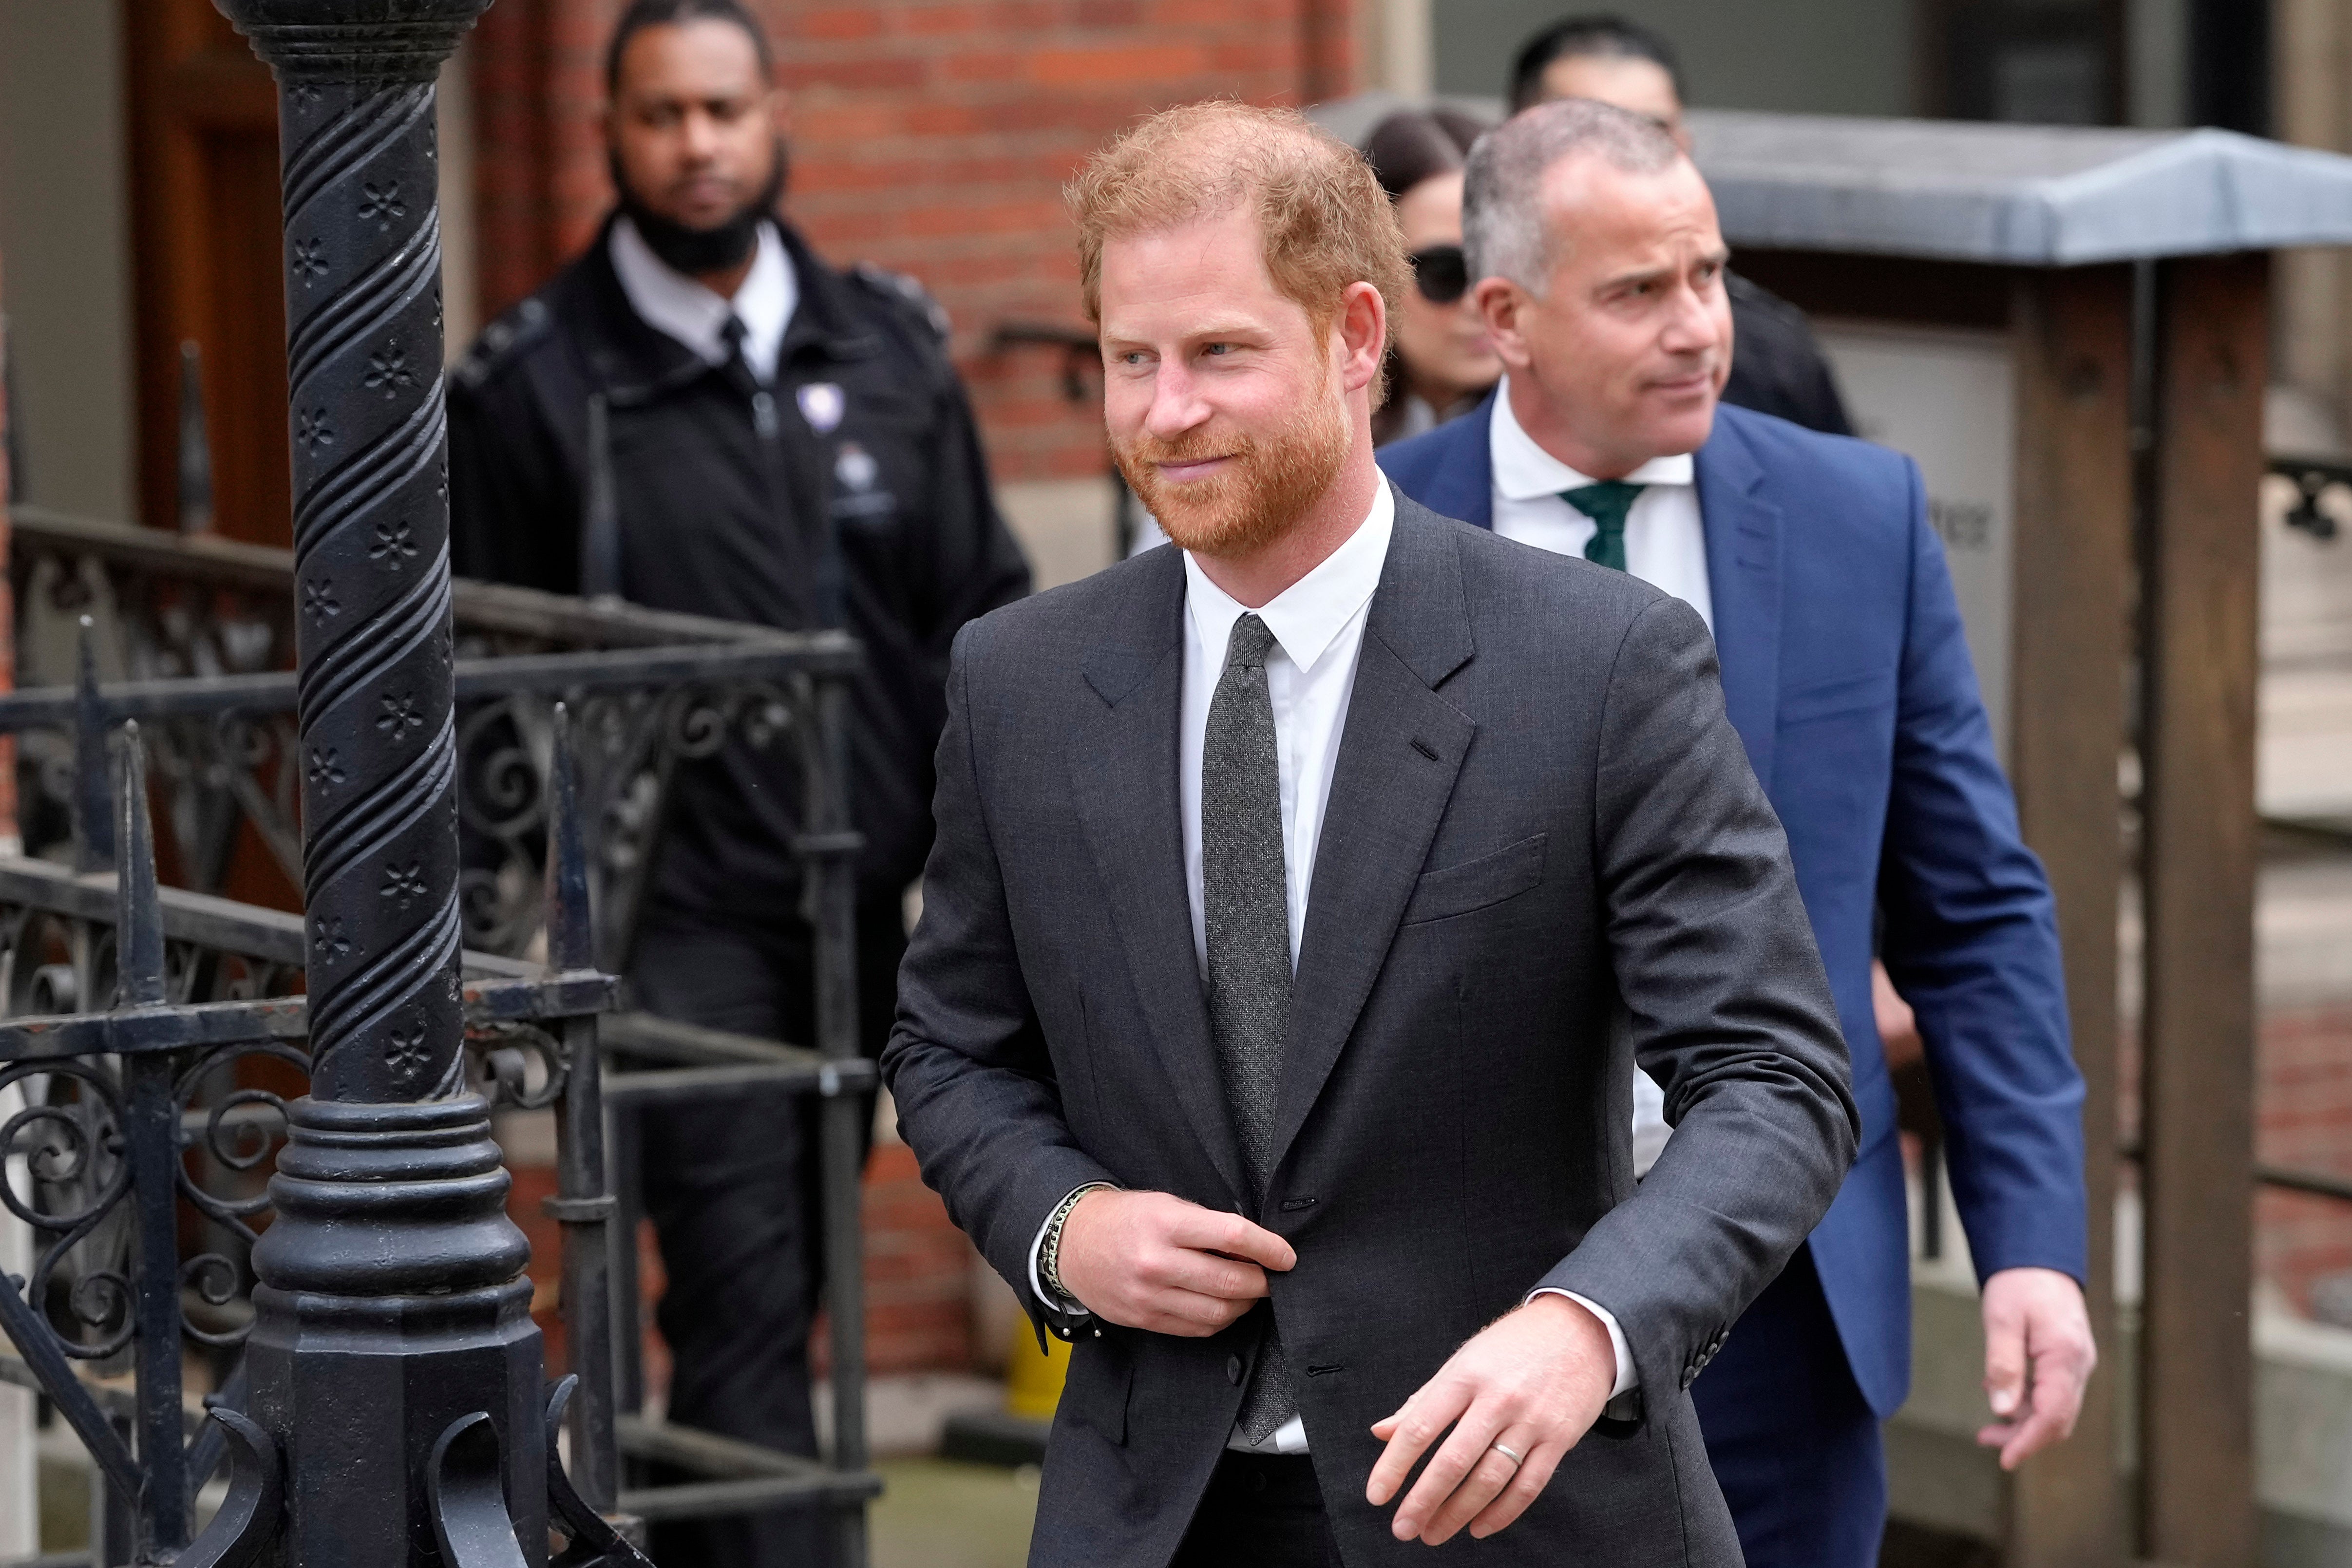 Prince Harry’s lawyers have accused Mr Murdoch over phone hacking